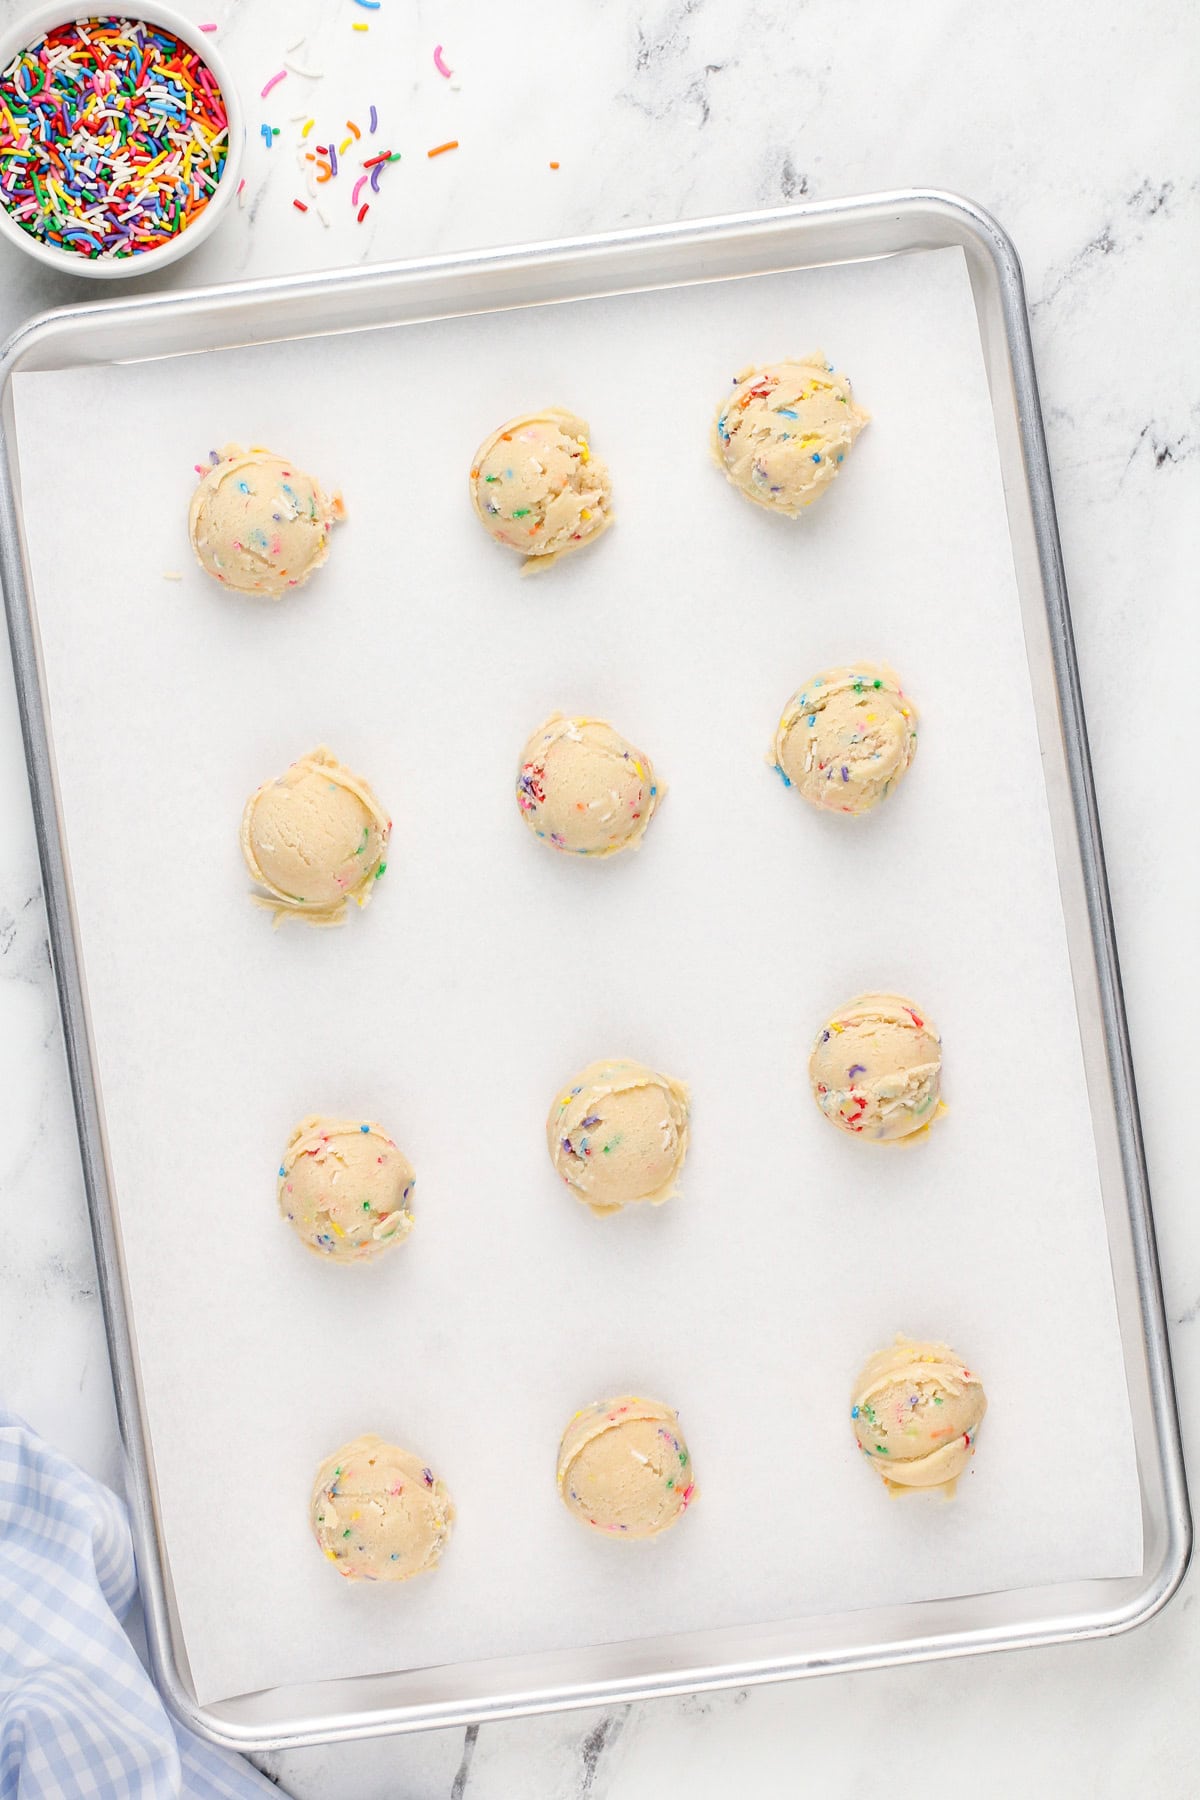 Portioned birthday cake cookie dough on a lined baking sheet, ready to go in the oven.